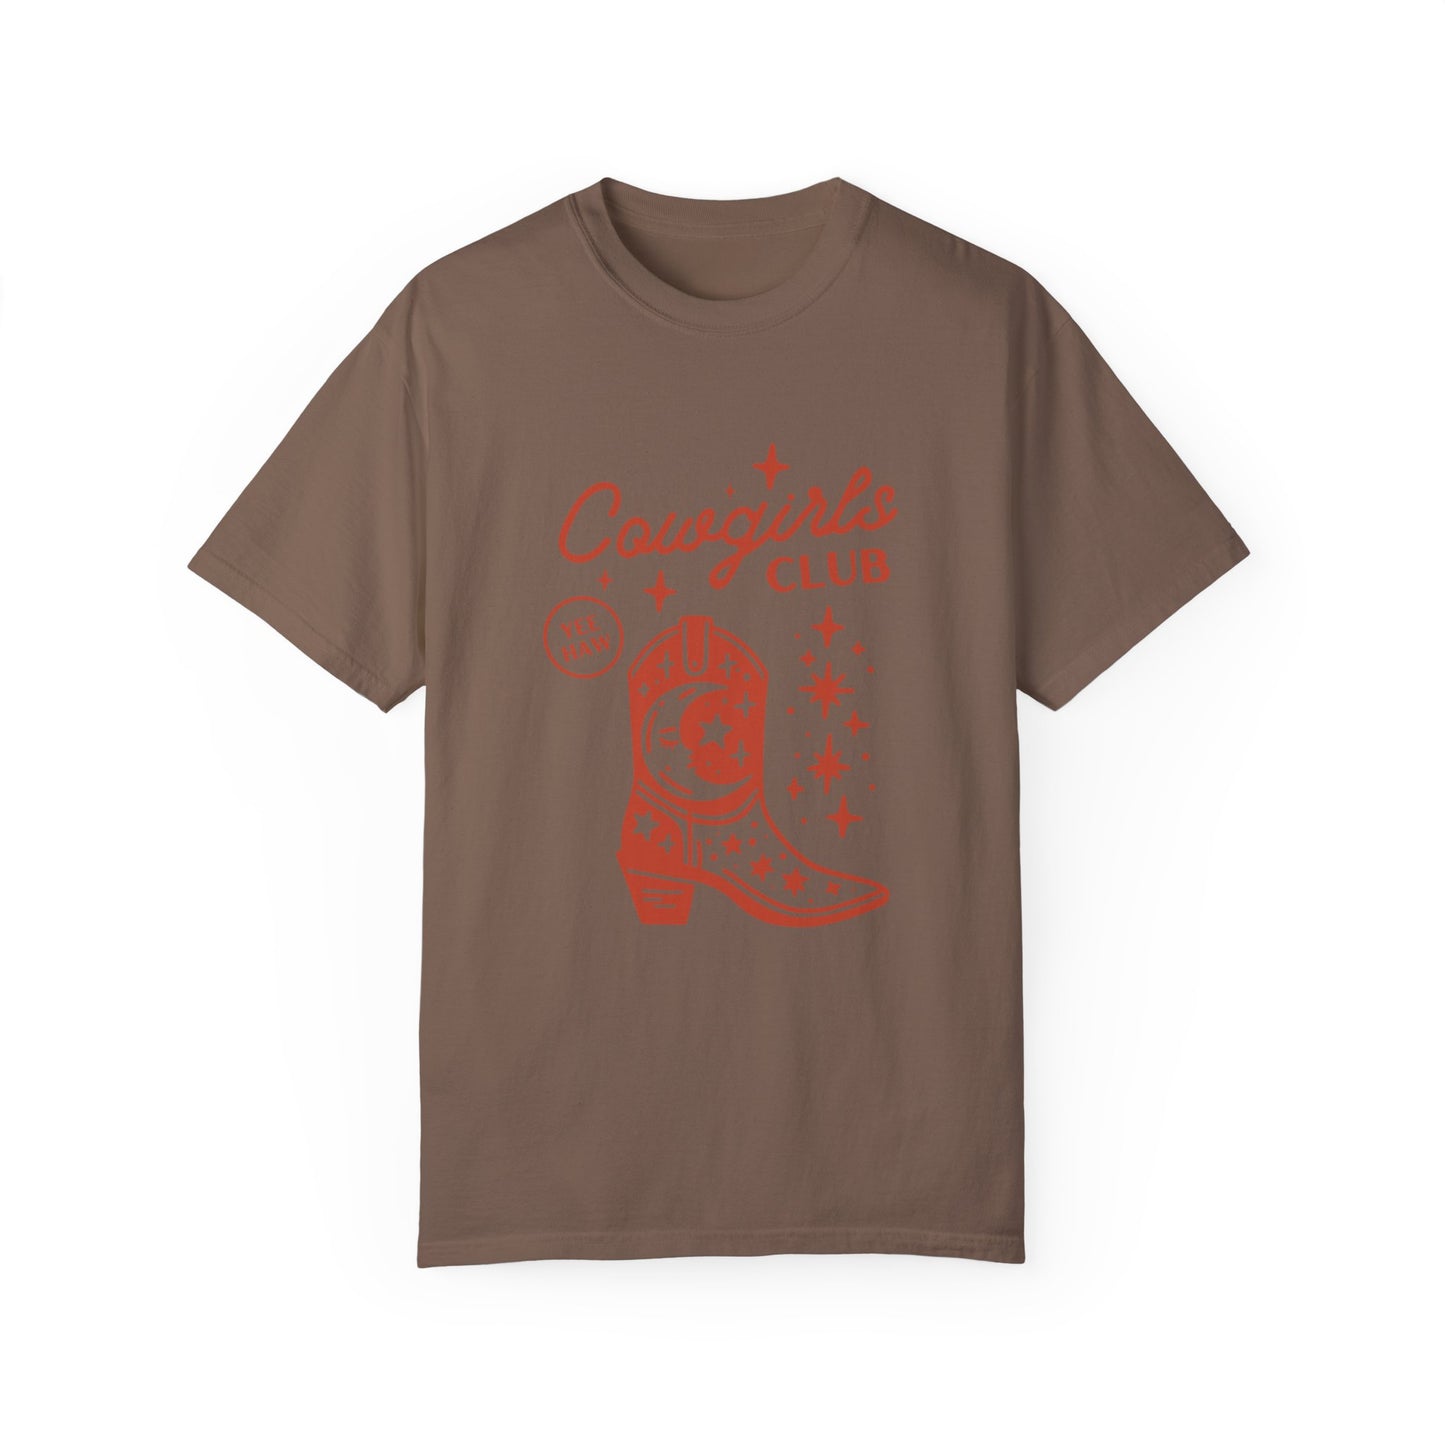 Cowgirls Club Comfort Colors Tee